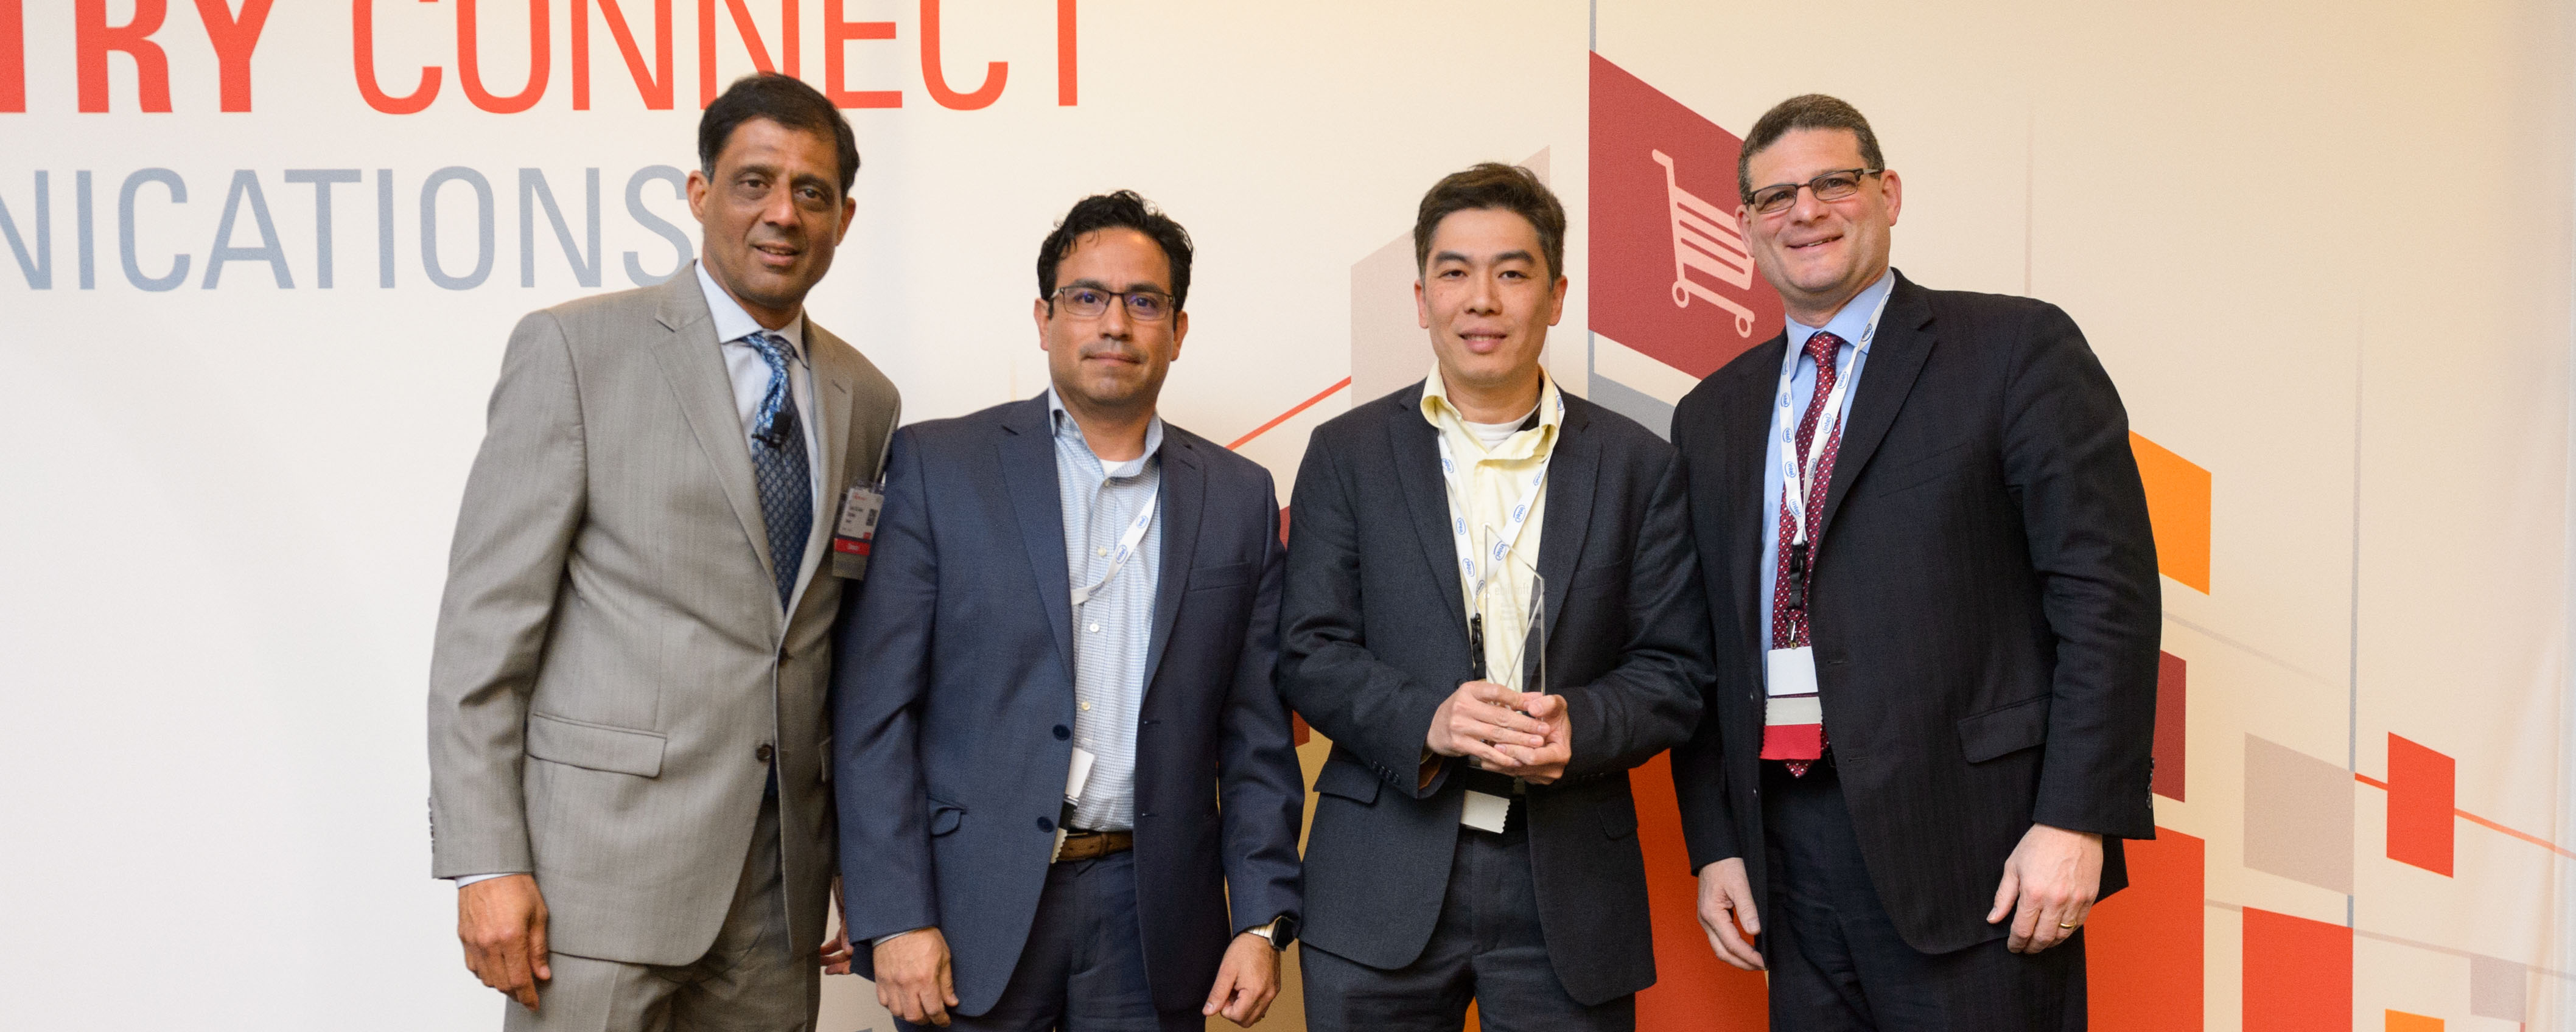 Ebillsoft awarded Oracle’s Solutions Business Excellence Award at Oracle Industry Connect.